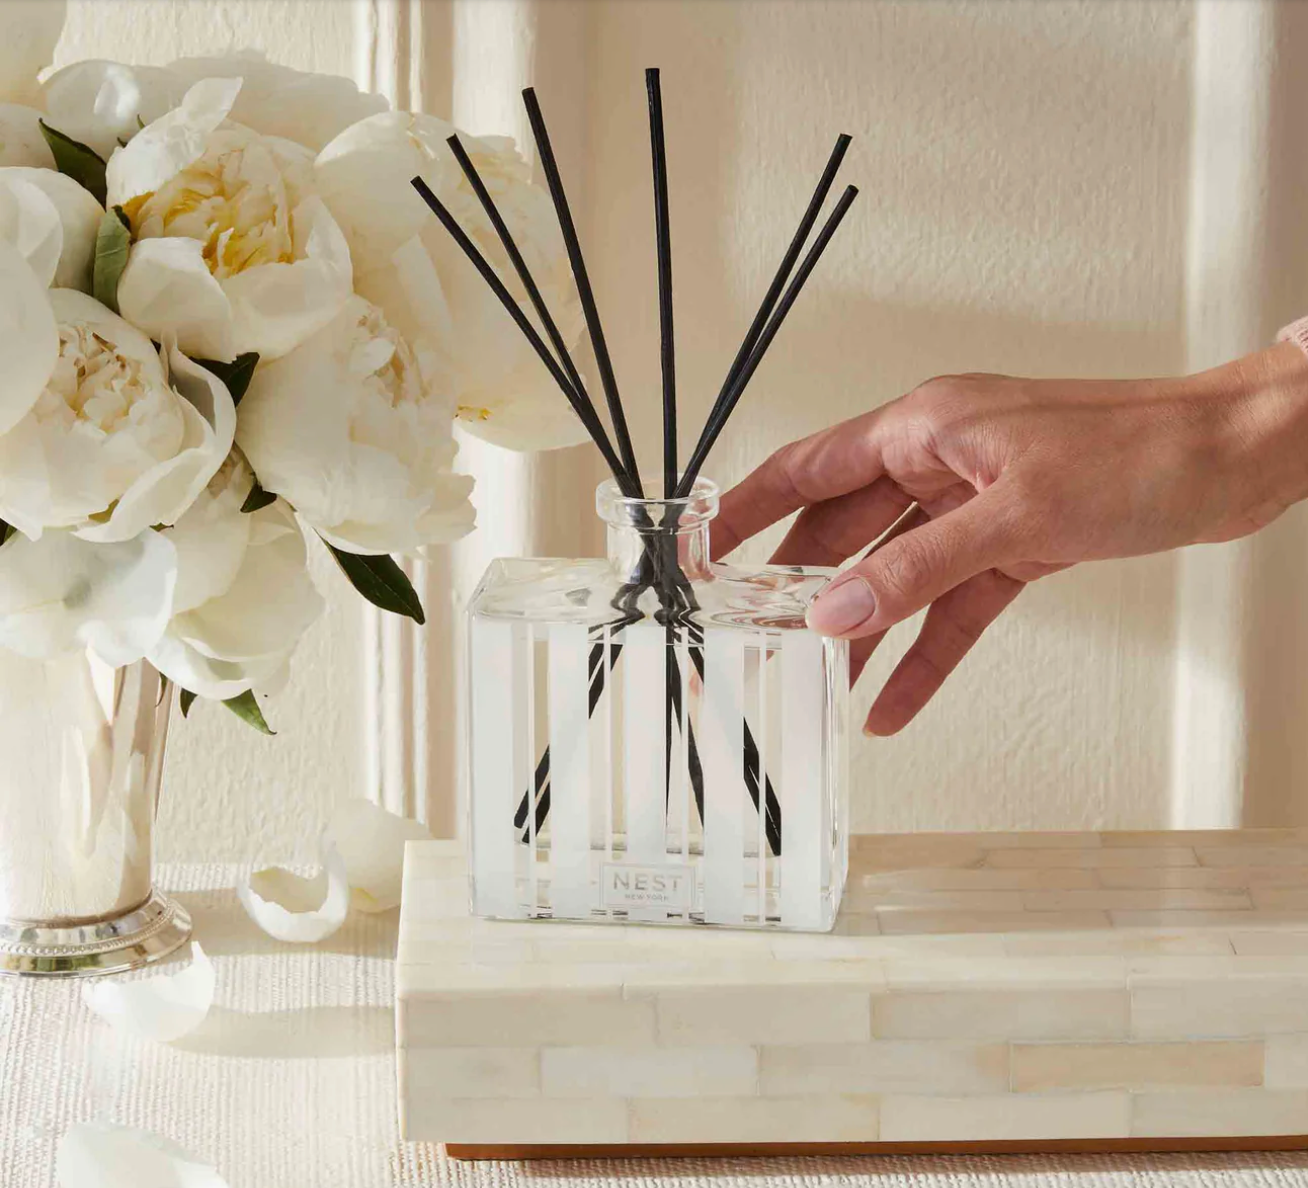 Coconut & Palm Reed Diffuser